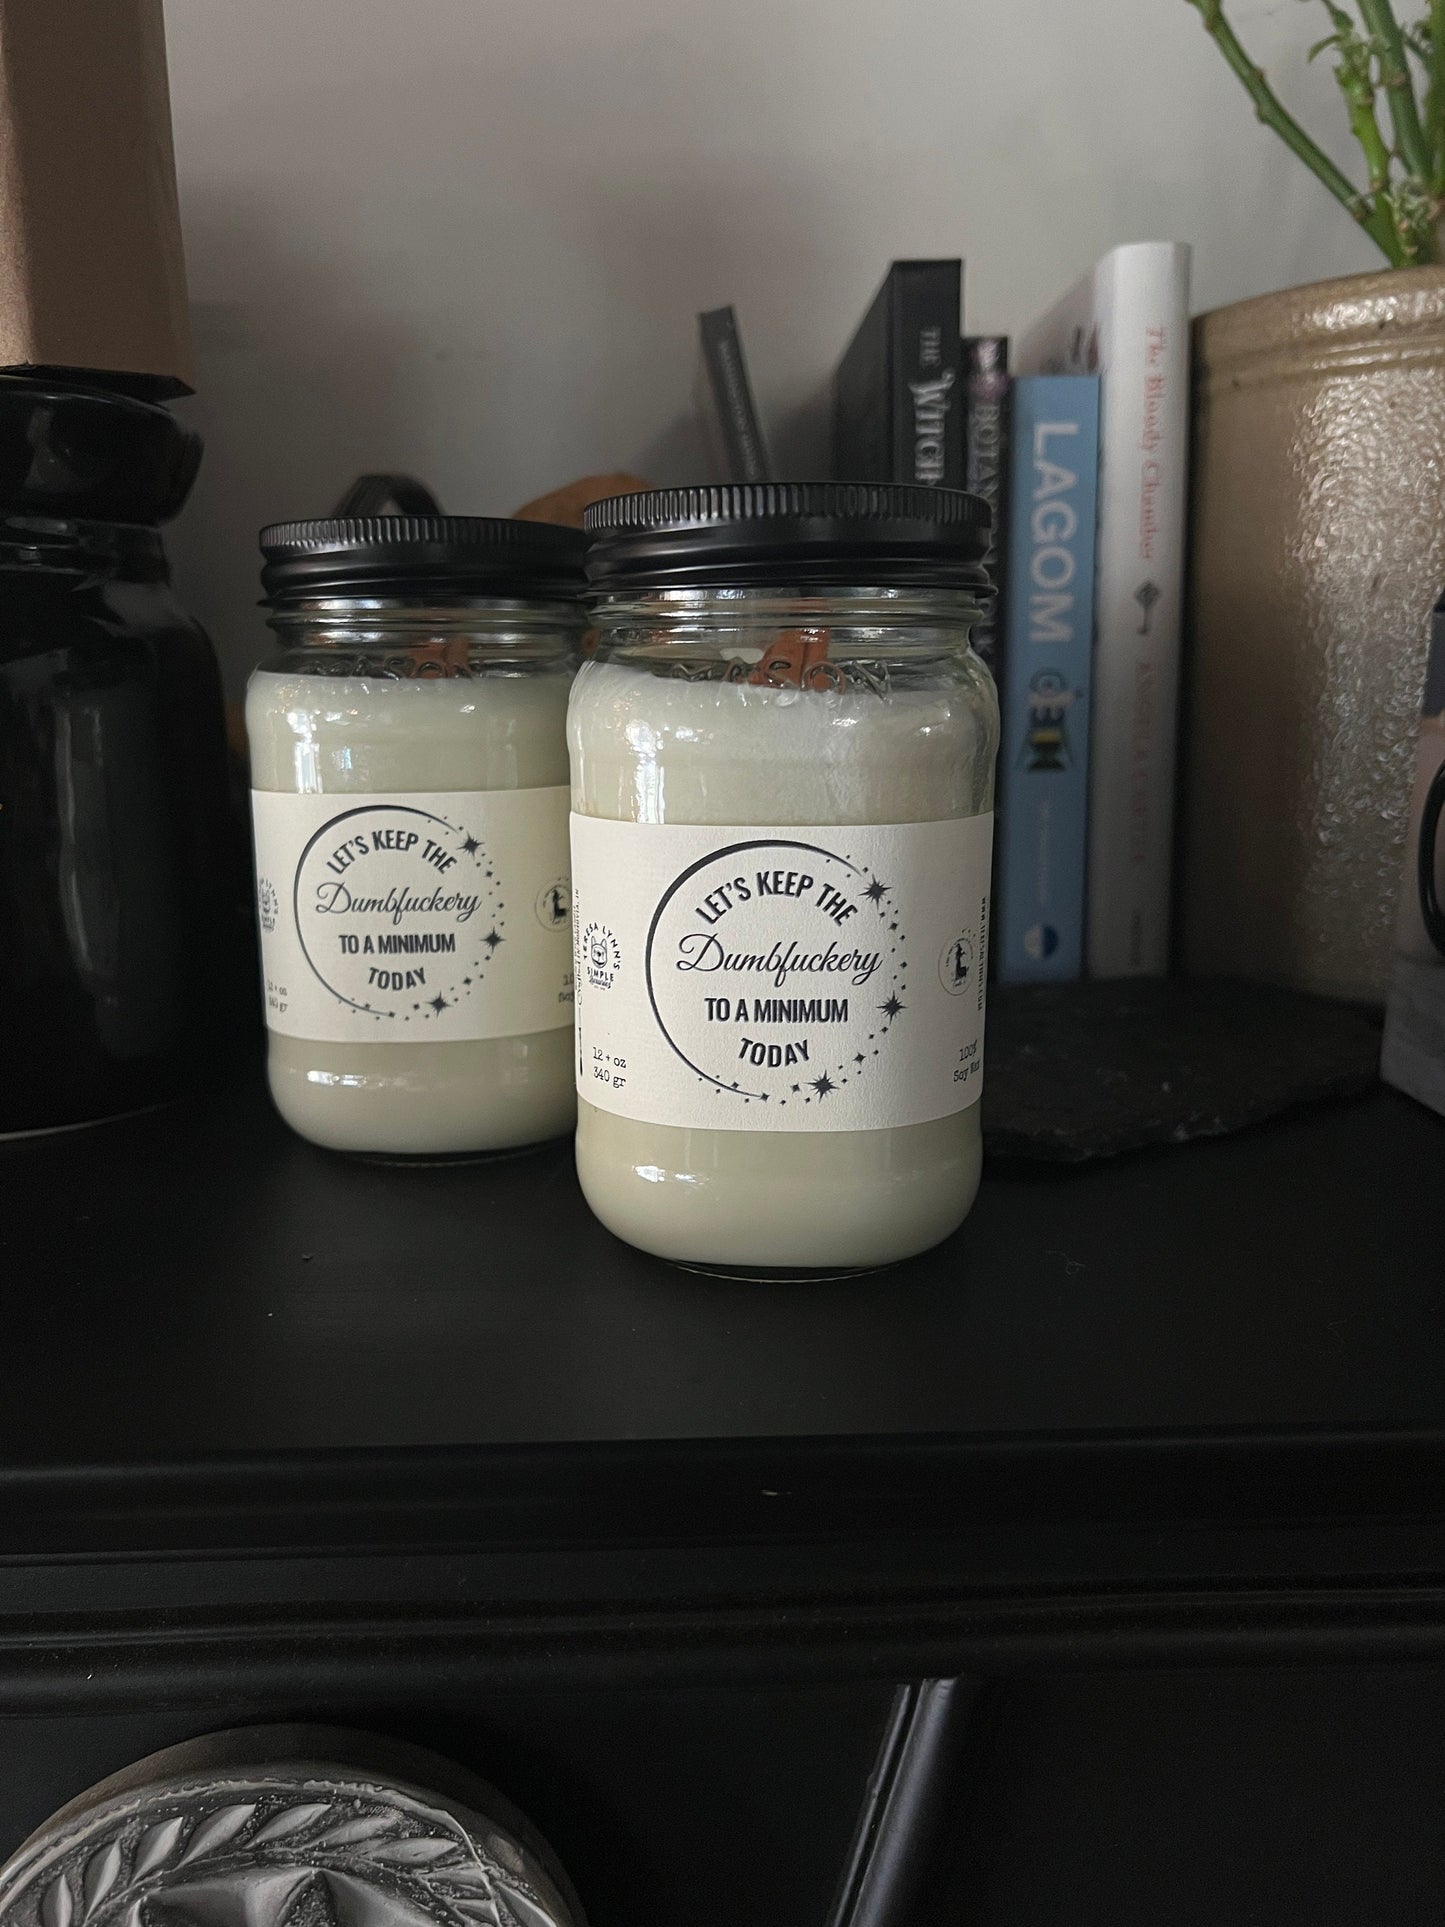 Let&#39;s Keep The Dumbfuckery To A Minimum Today, Caramel Macchiato Scented Wooden Wick Soy Wax Candle